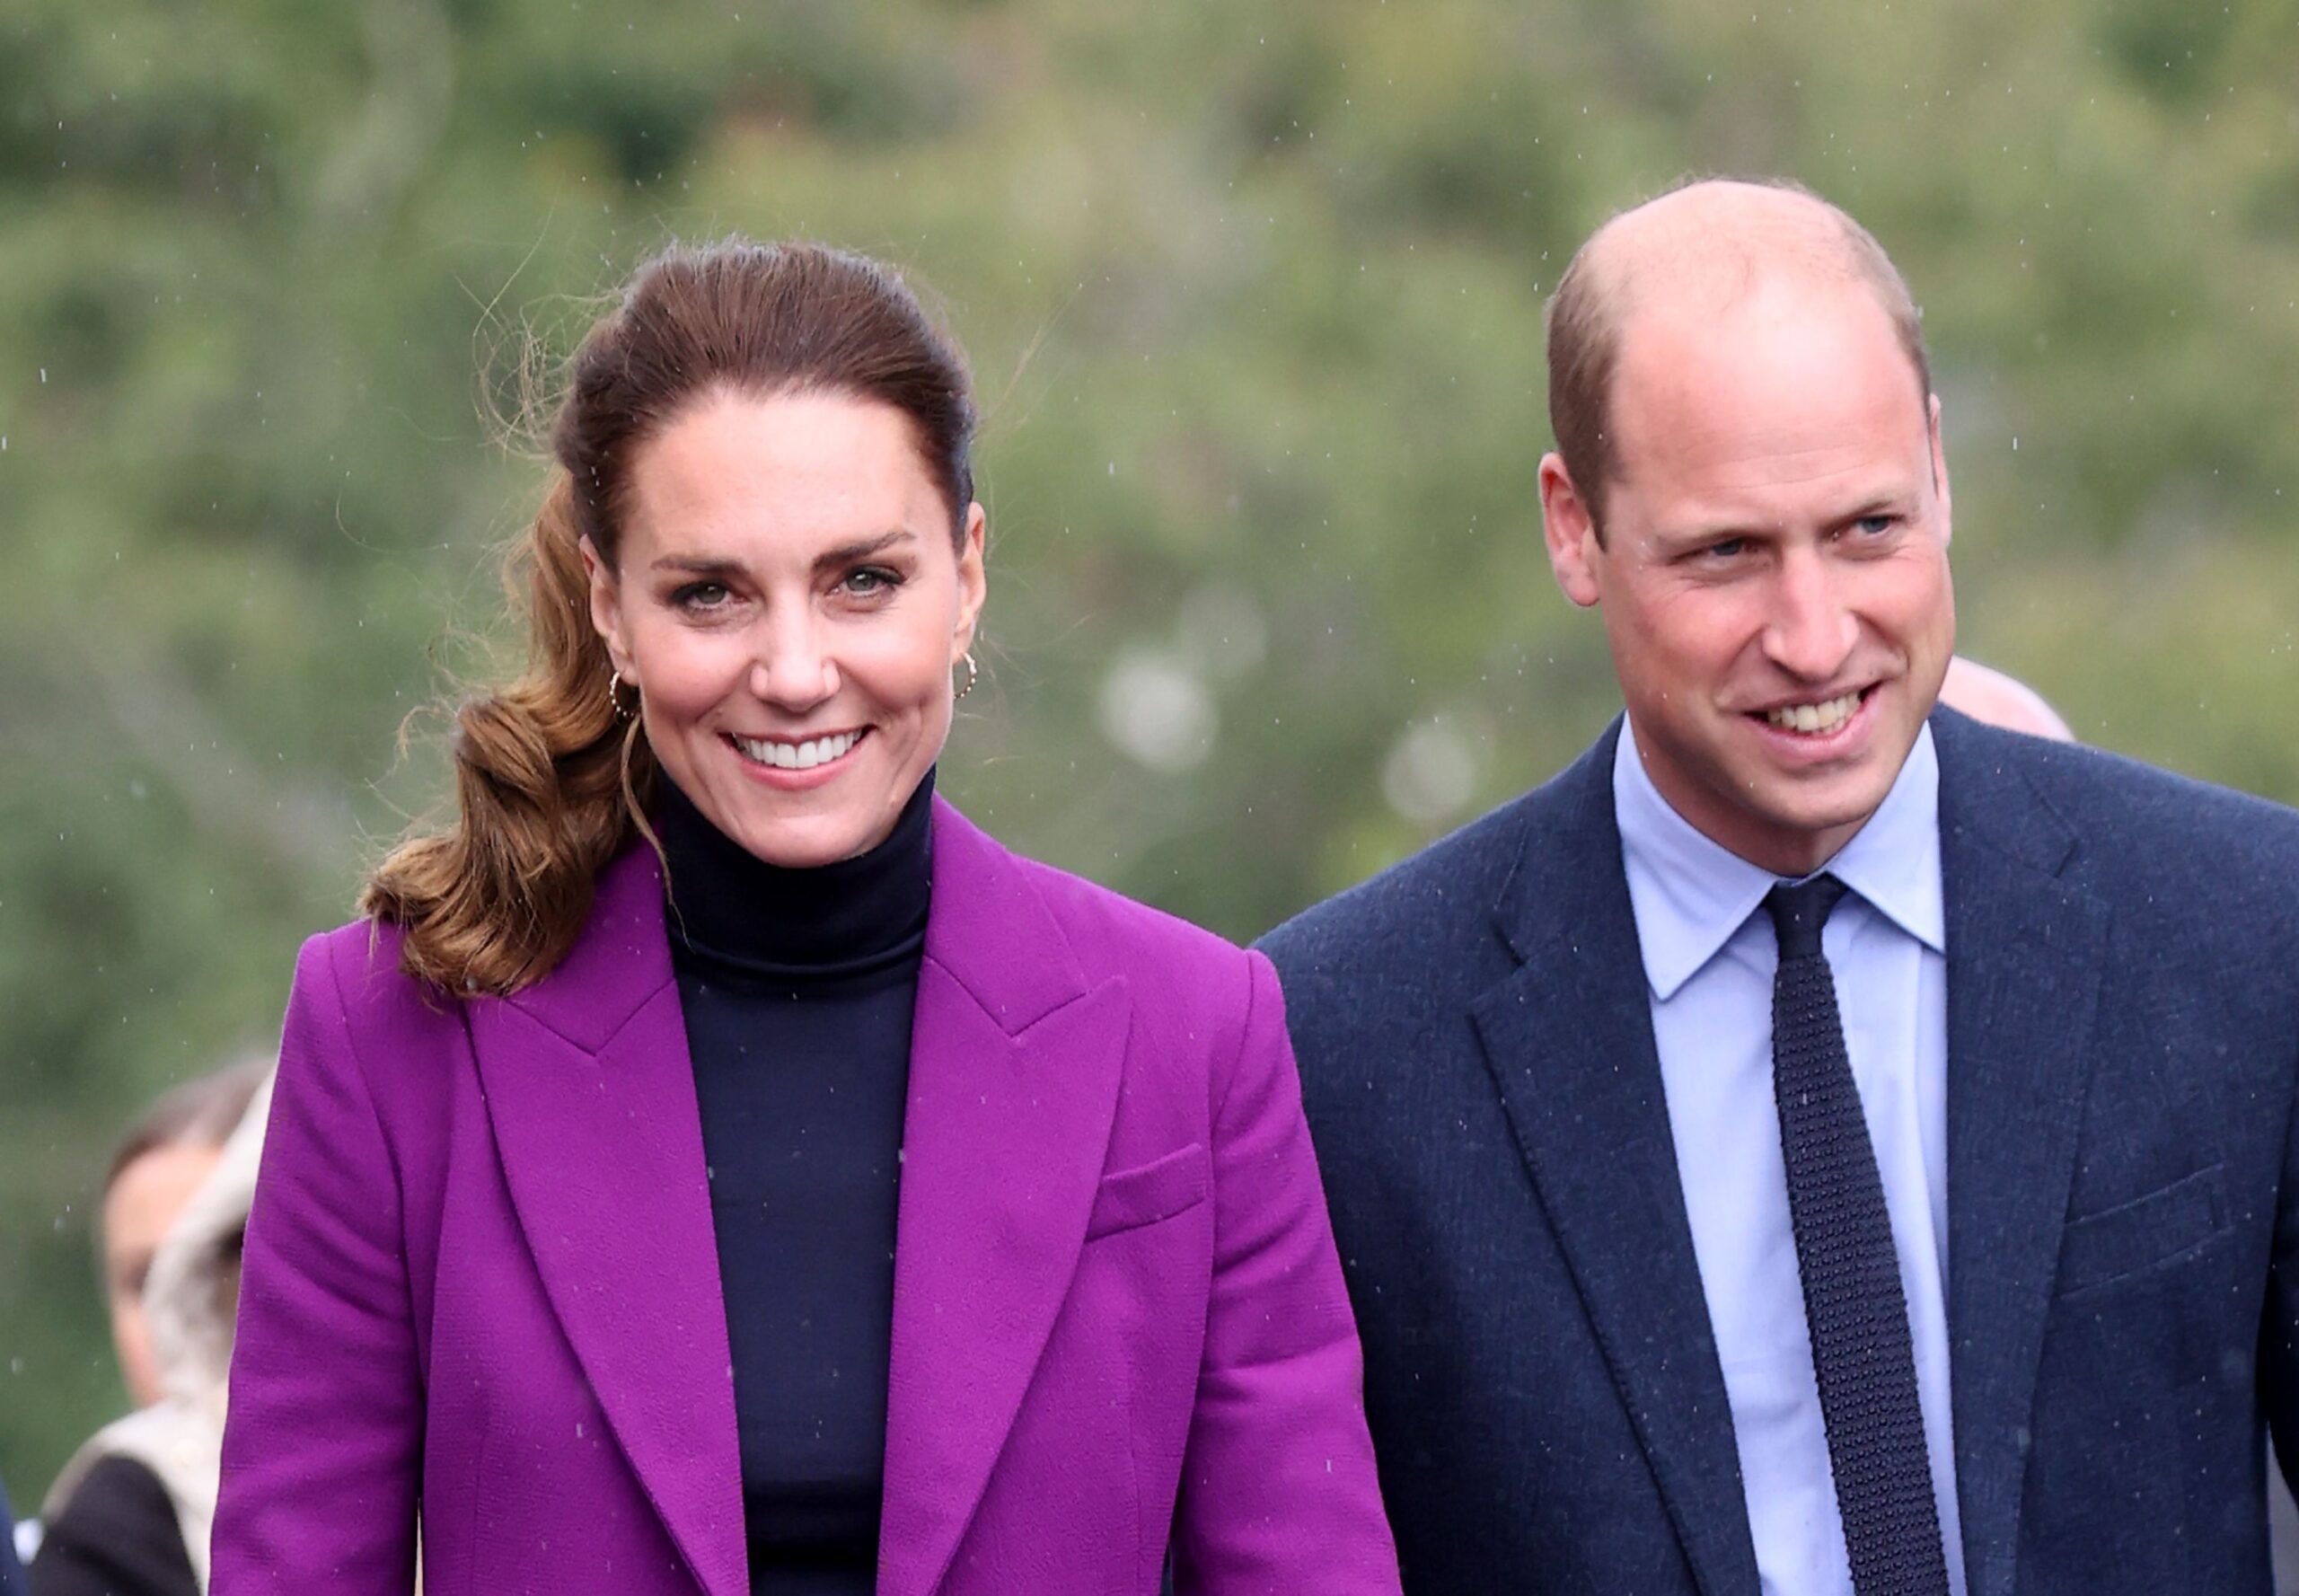 Kate Middleton: 10 Daily Things She Is Not Allowed To Do As The Princess Of Wales